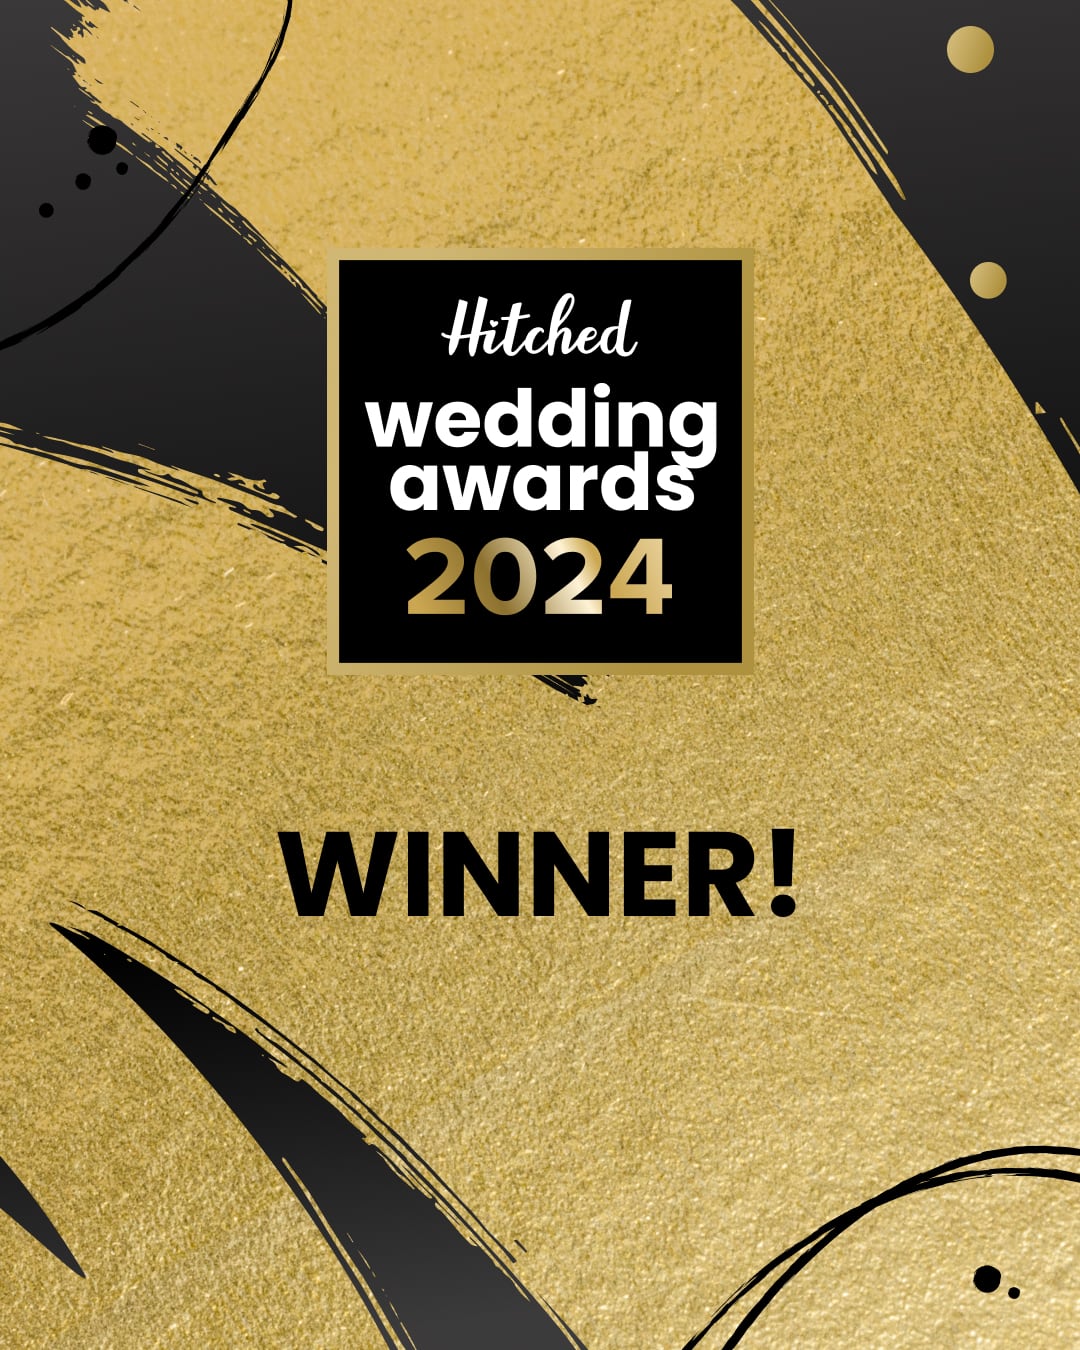 Amazing Capture named winners of the annual Hitched Wedding Awards 2024, and has been crowned as one of the best wedding professionals in the UK